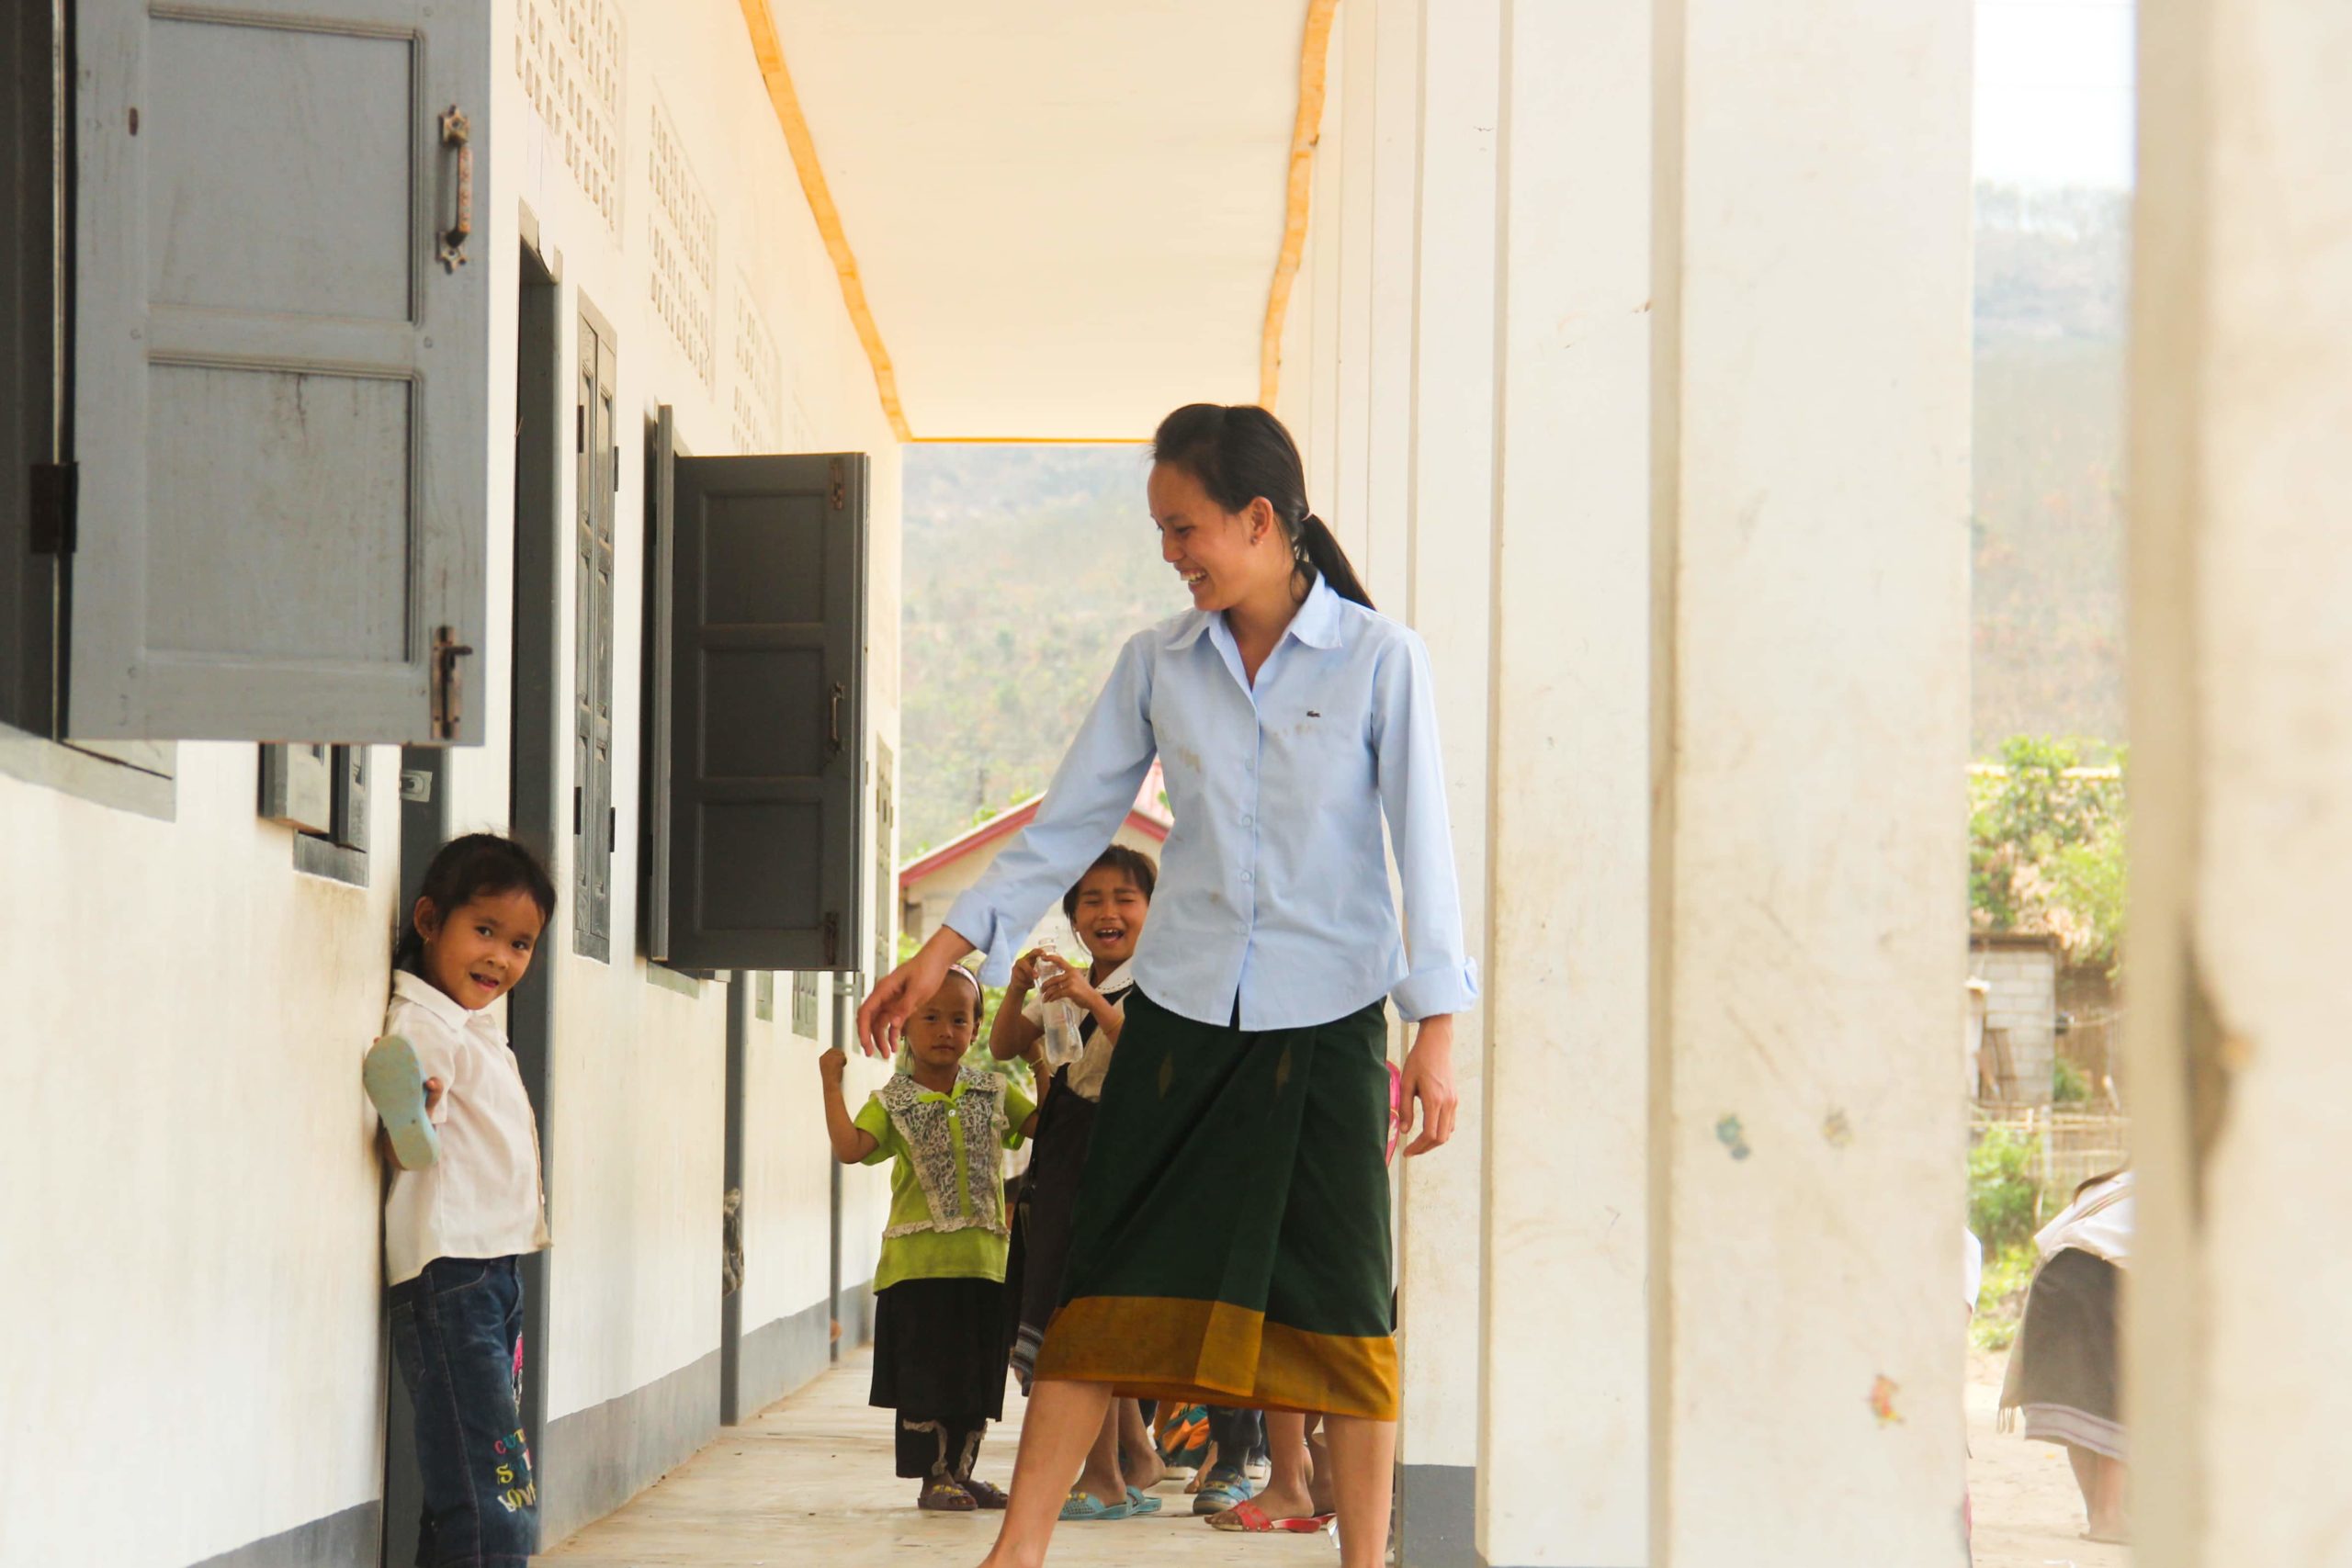 Teacher plays with students outside class in Laos.